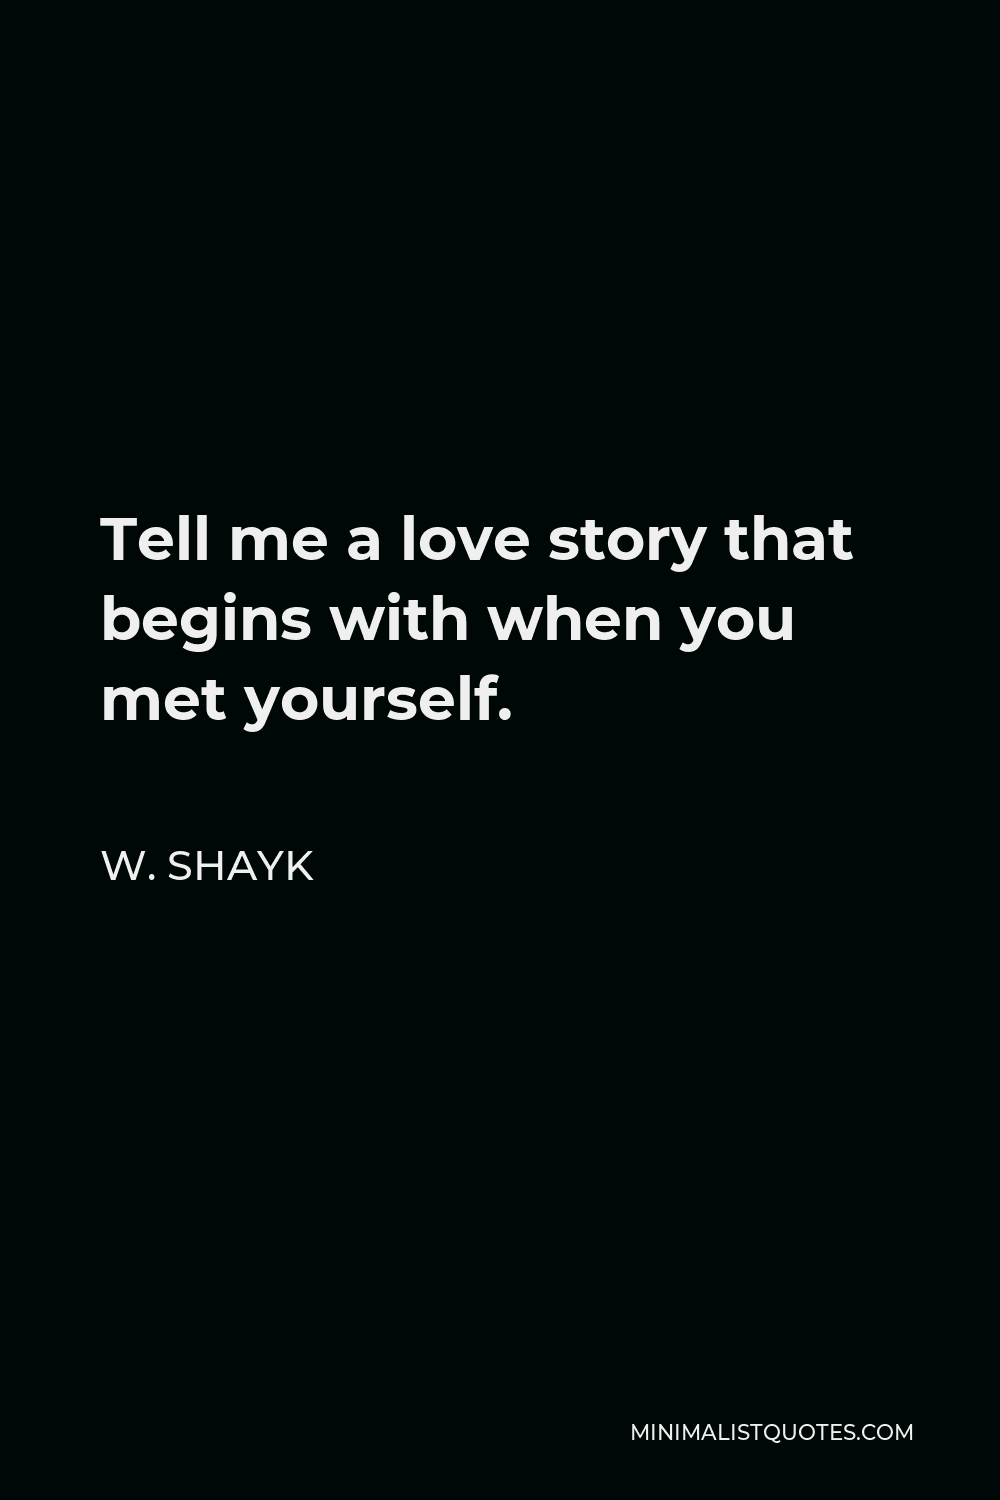 W. Shayk Quote - Tell me a love story that begins with when you met yourself.